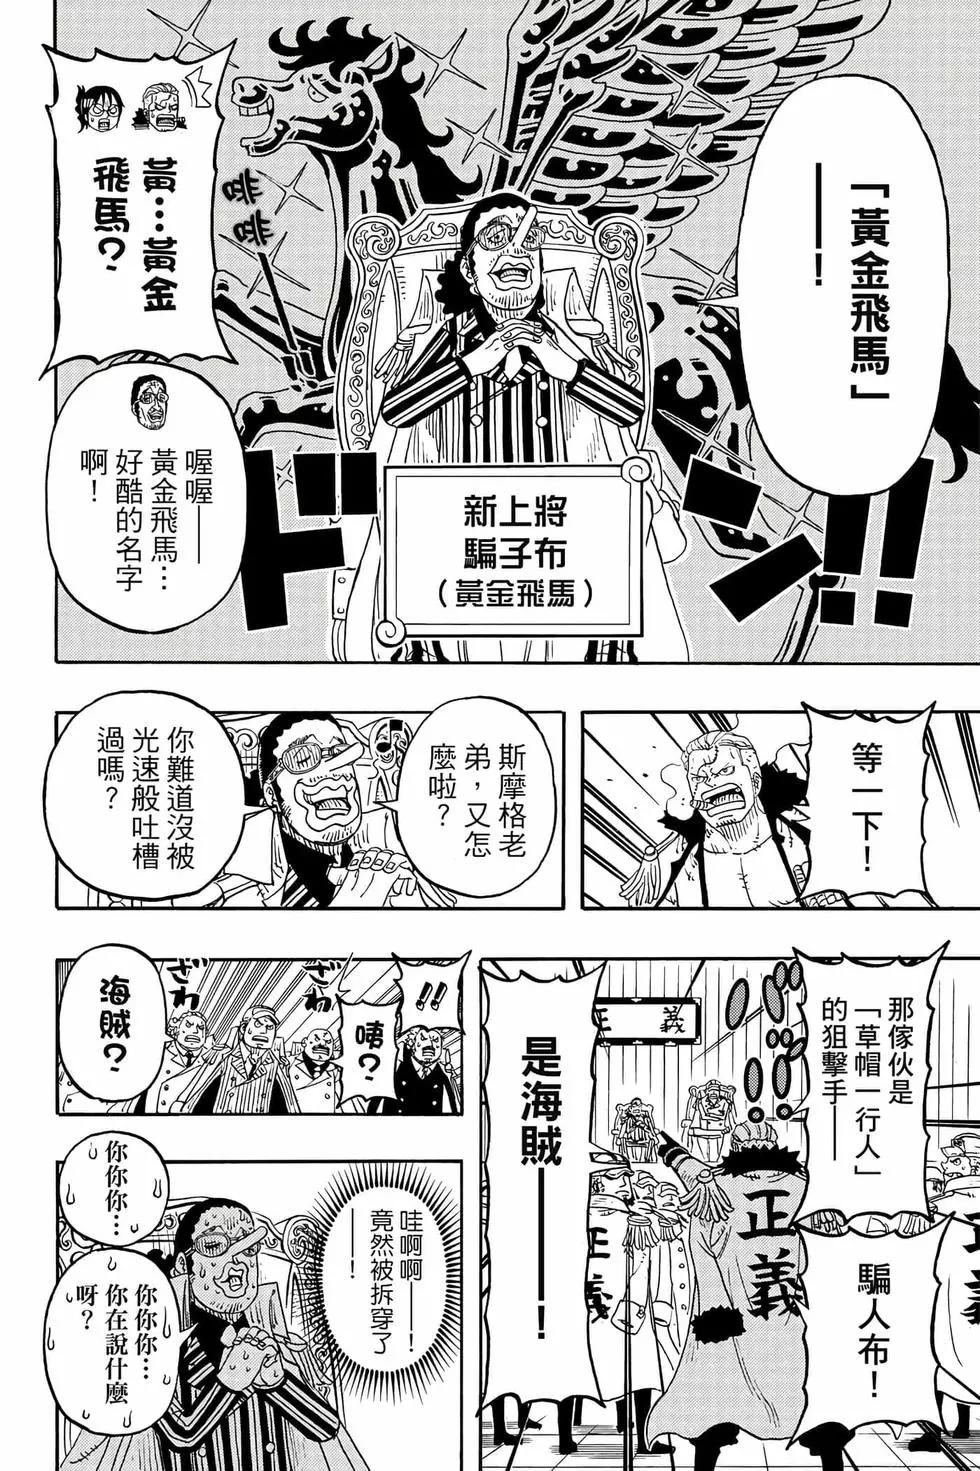 One piece party - 第04卷(1/4) - 7